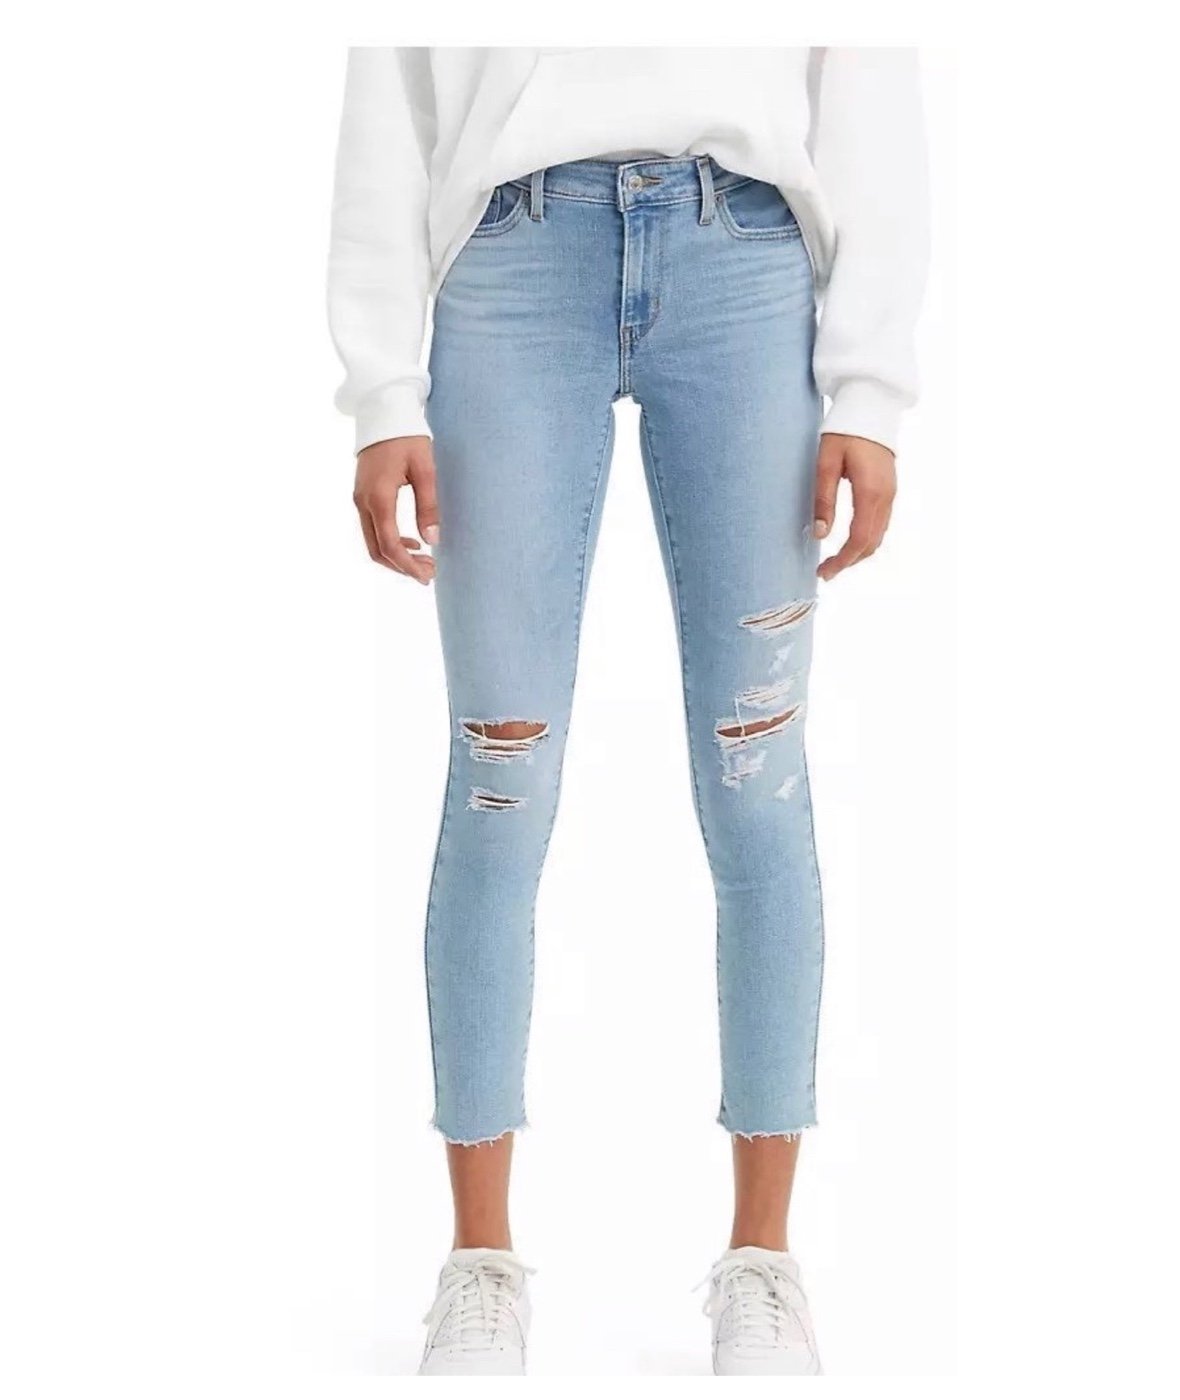 Amazing Levi’s Ripped Jeans NEW 711 Skinny Ankle Croppe